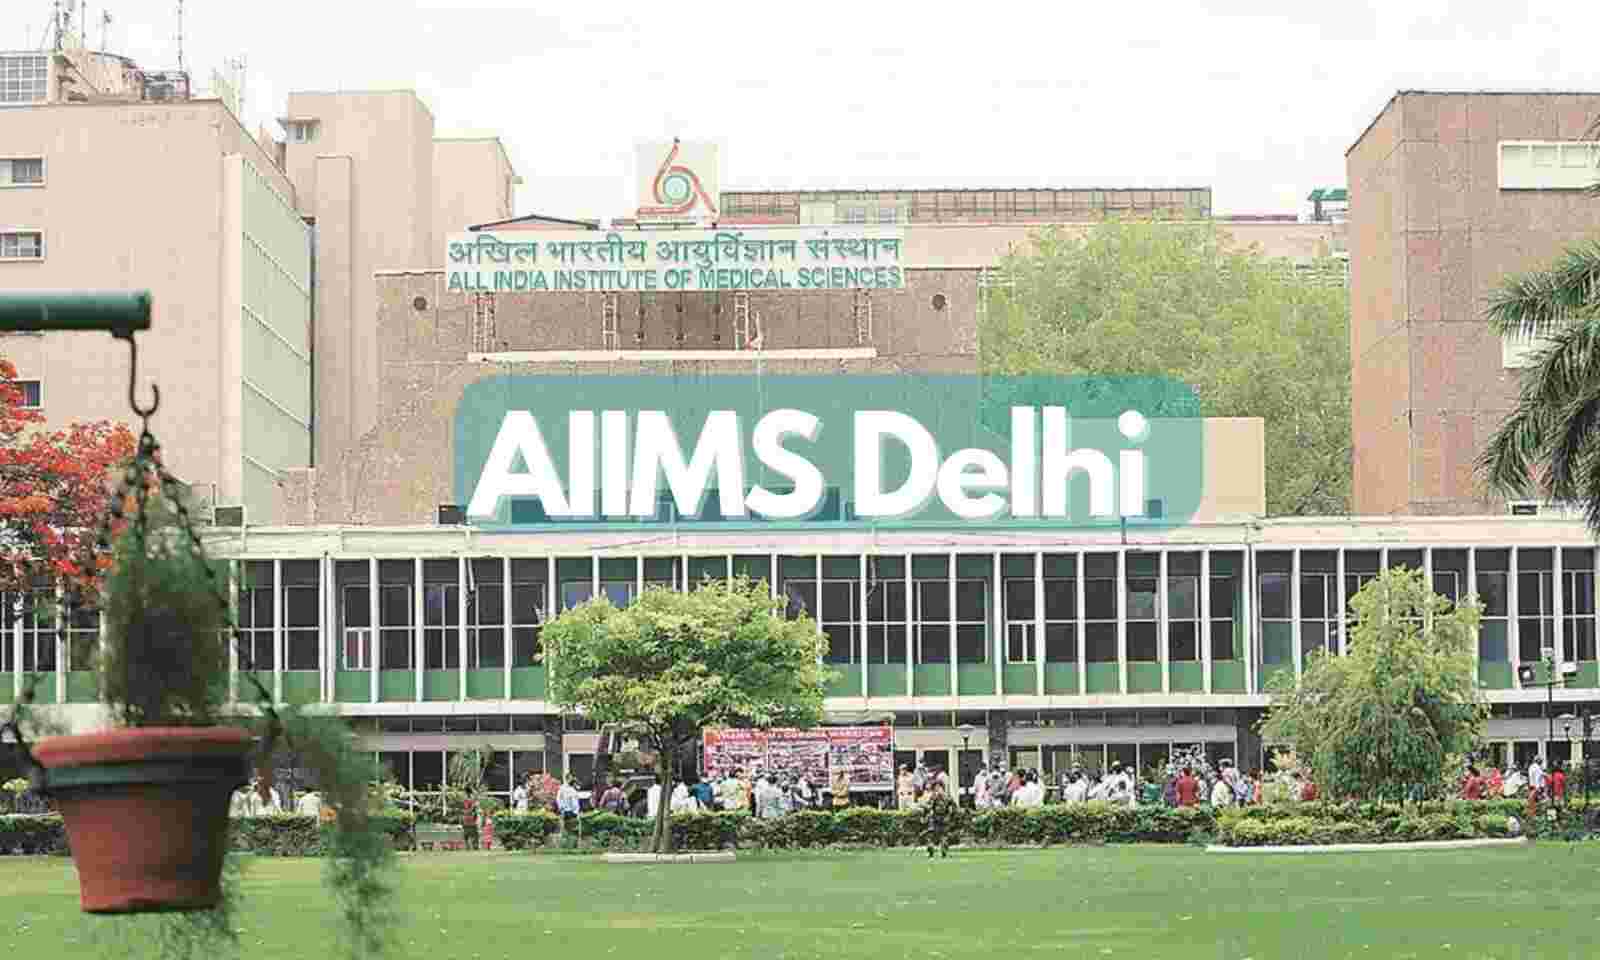 2932 Aiims Delhi Photos  High Res Pictures  Getty Images